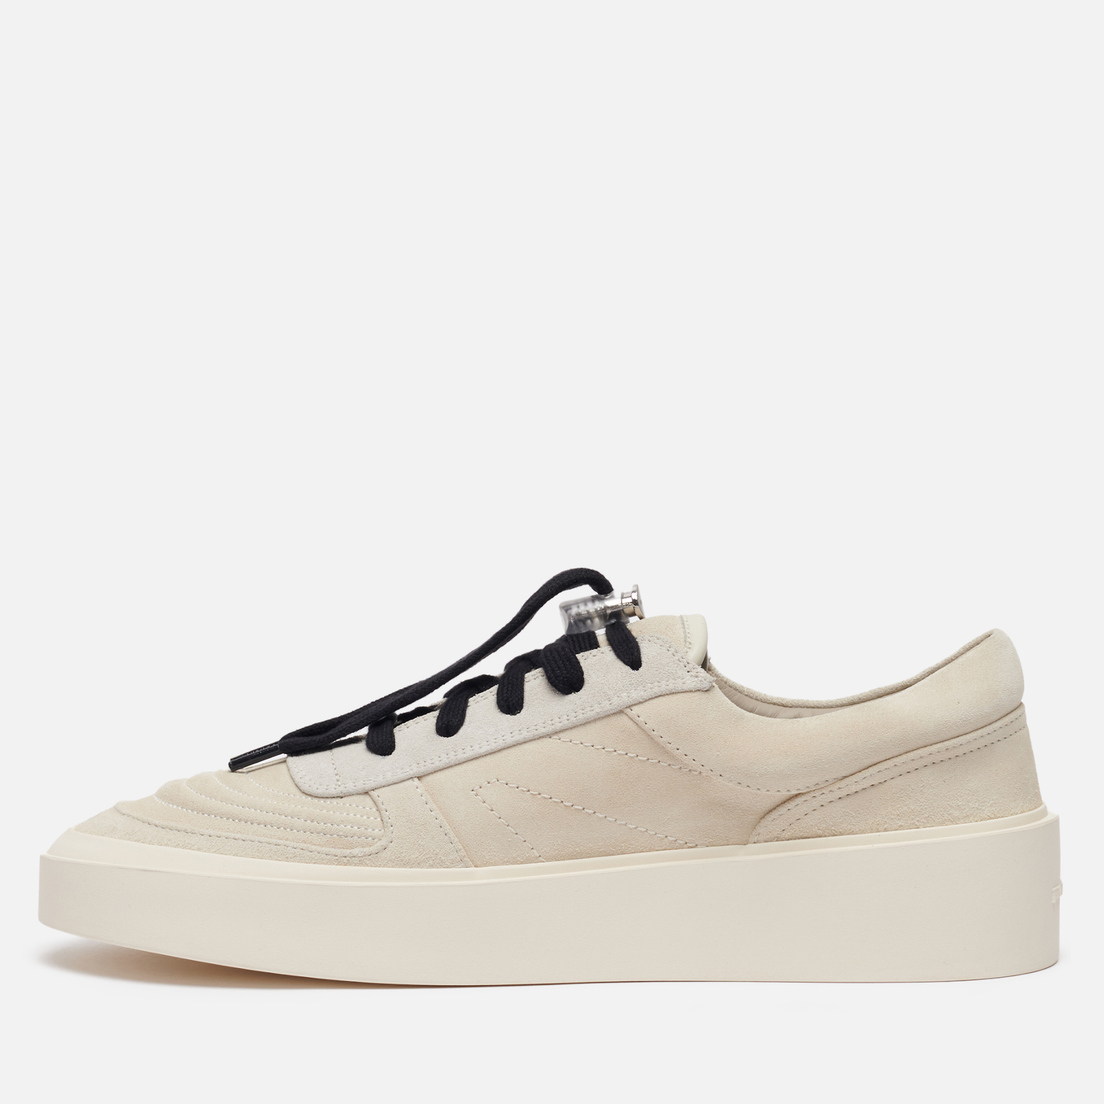 Fear of God Мужские кроссовки Skate Low Leather/Suede